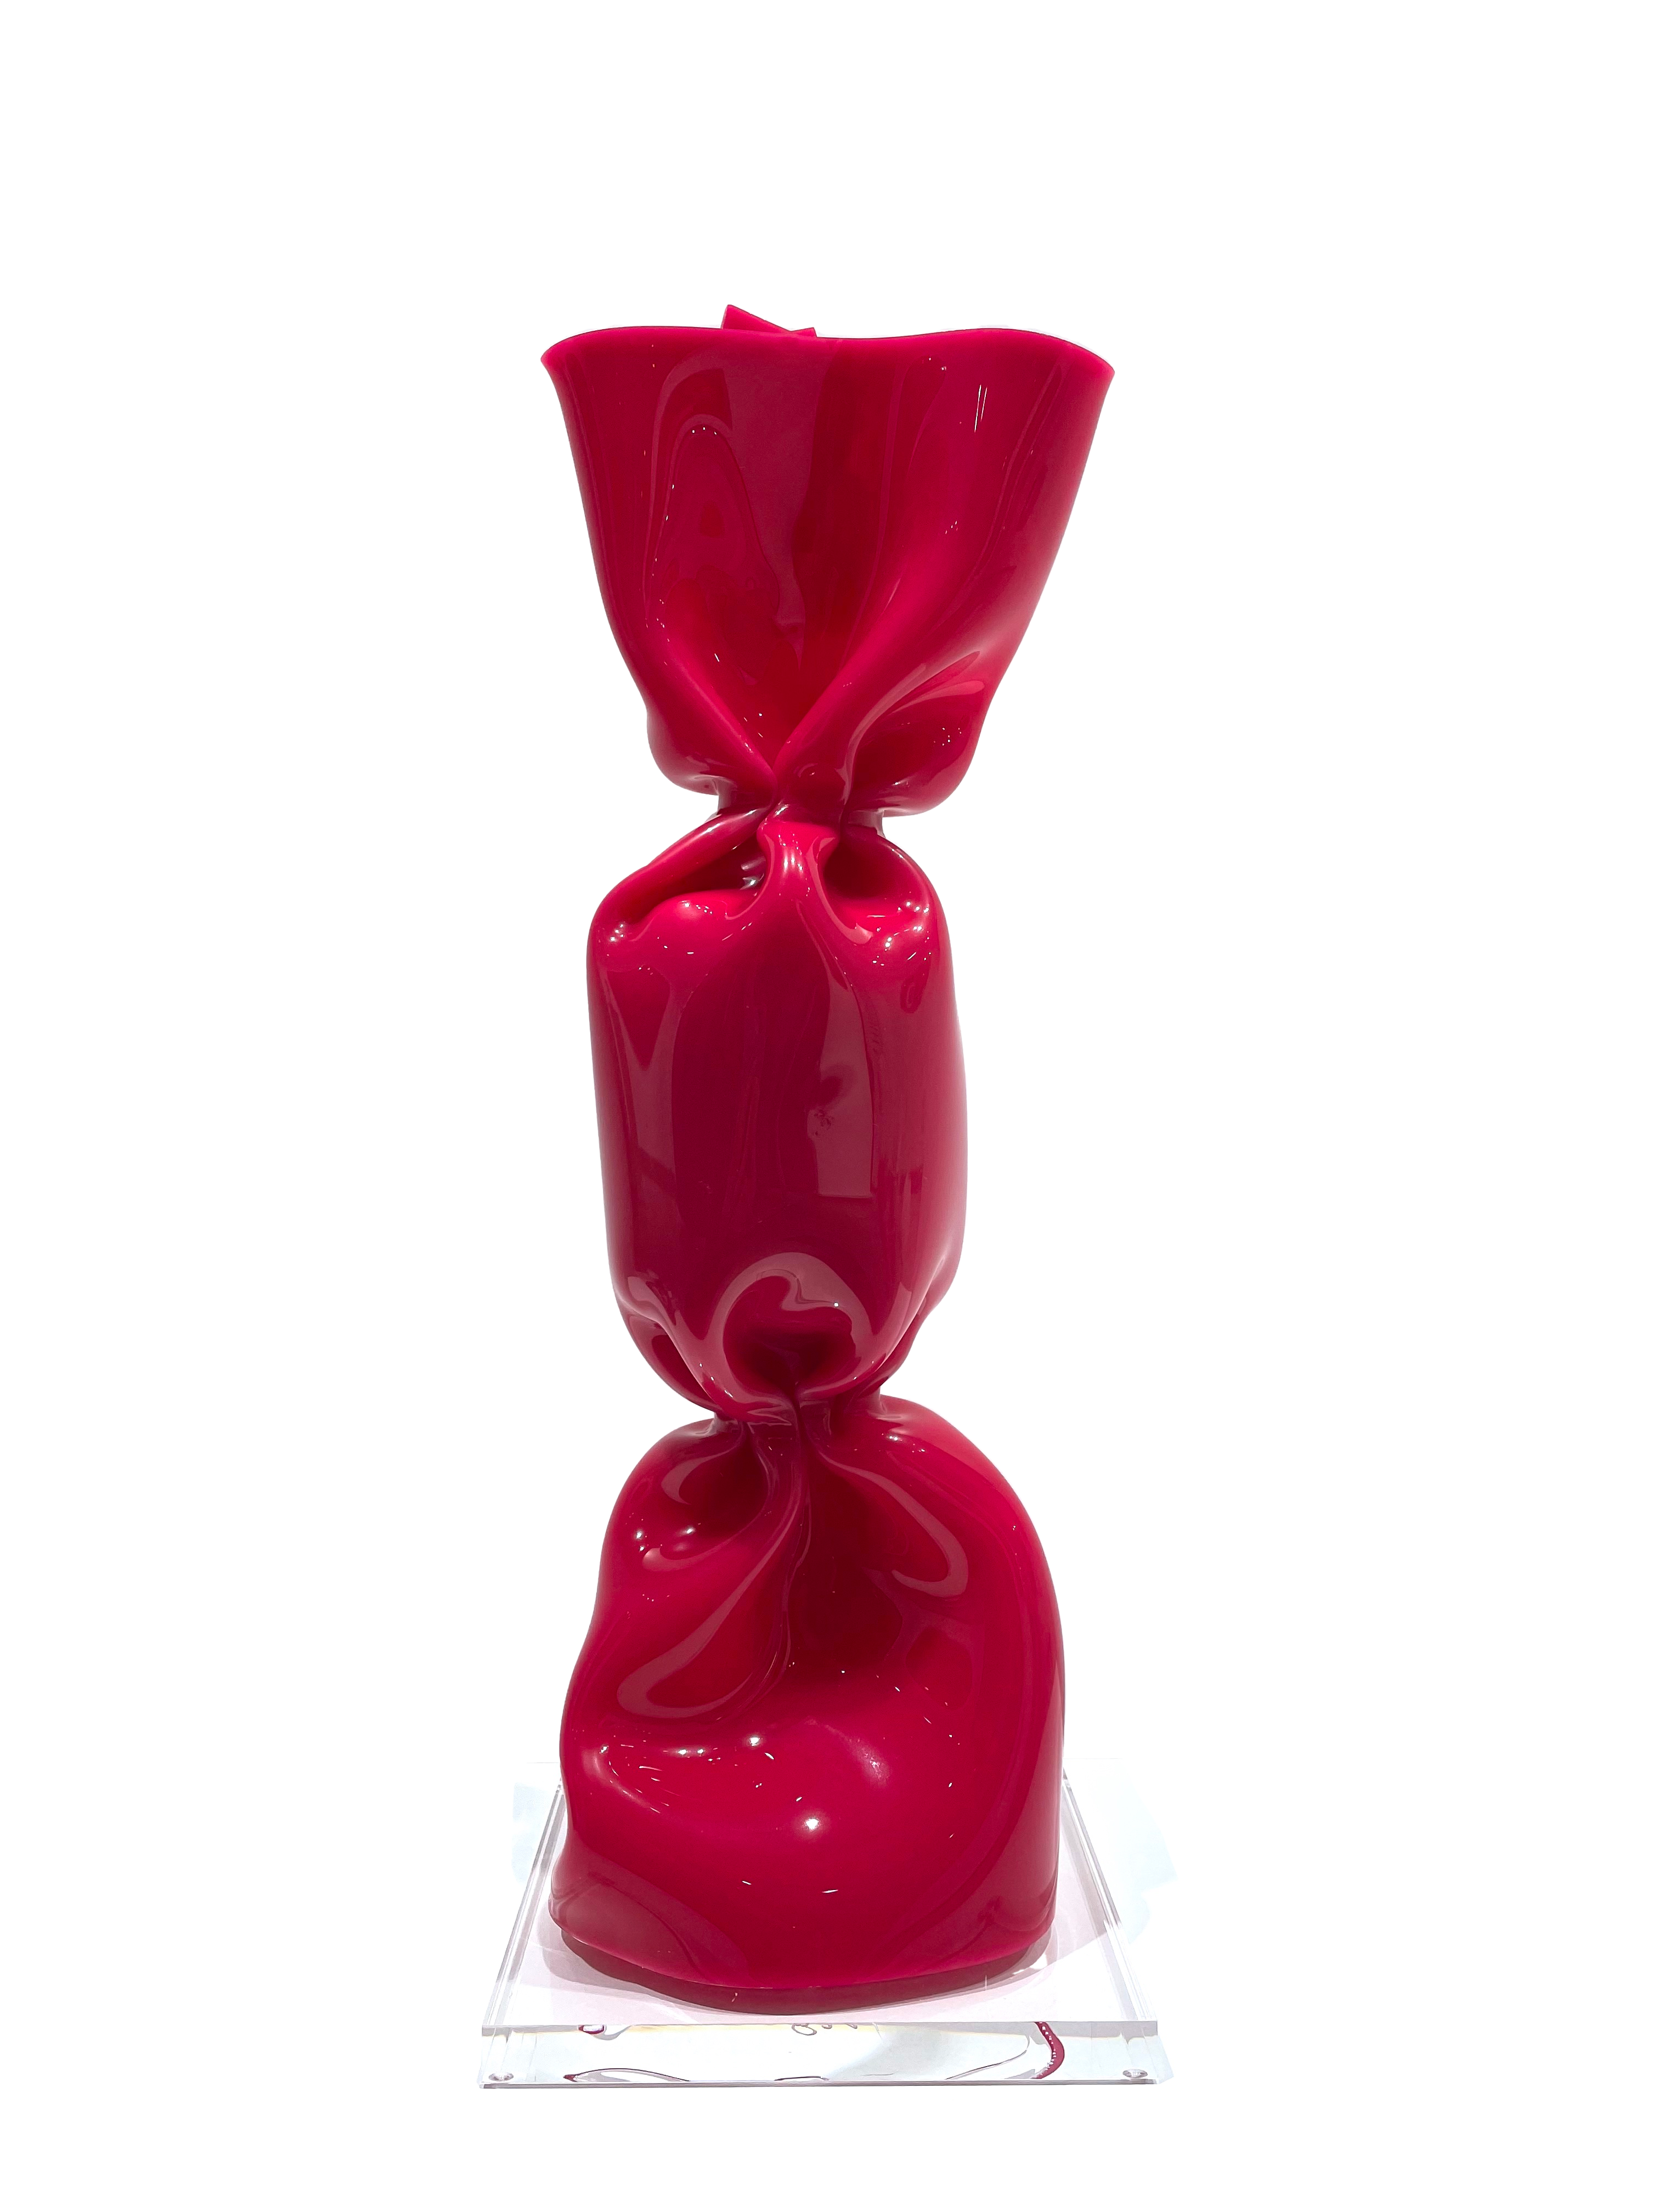 Laurence Jenk Artiste<br />
Wrapping Bonbon fuschia<br />
© Marciano Contemporary